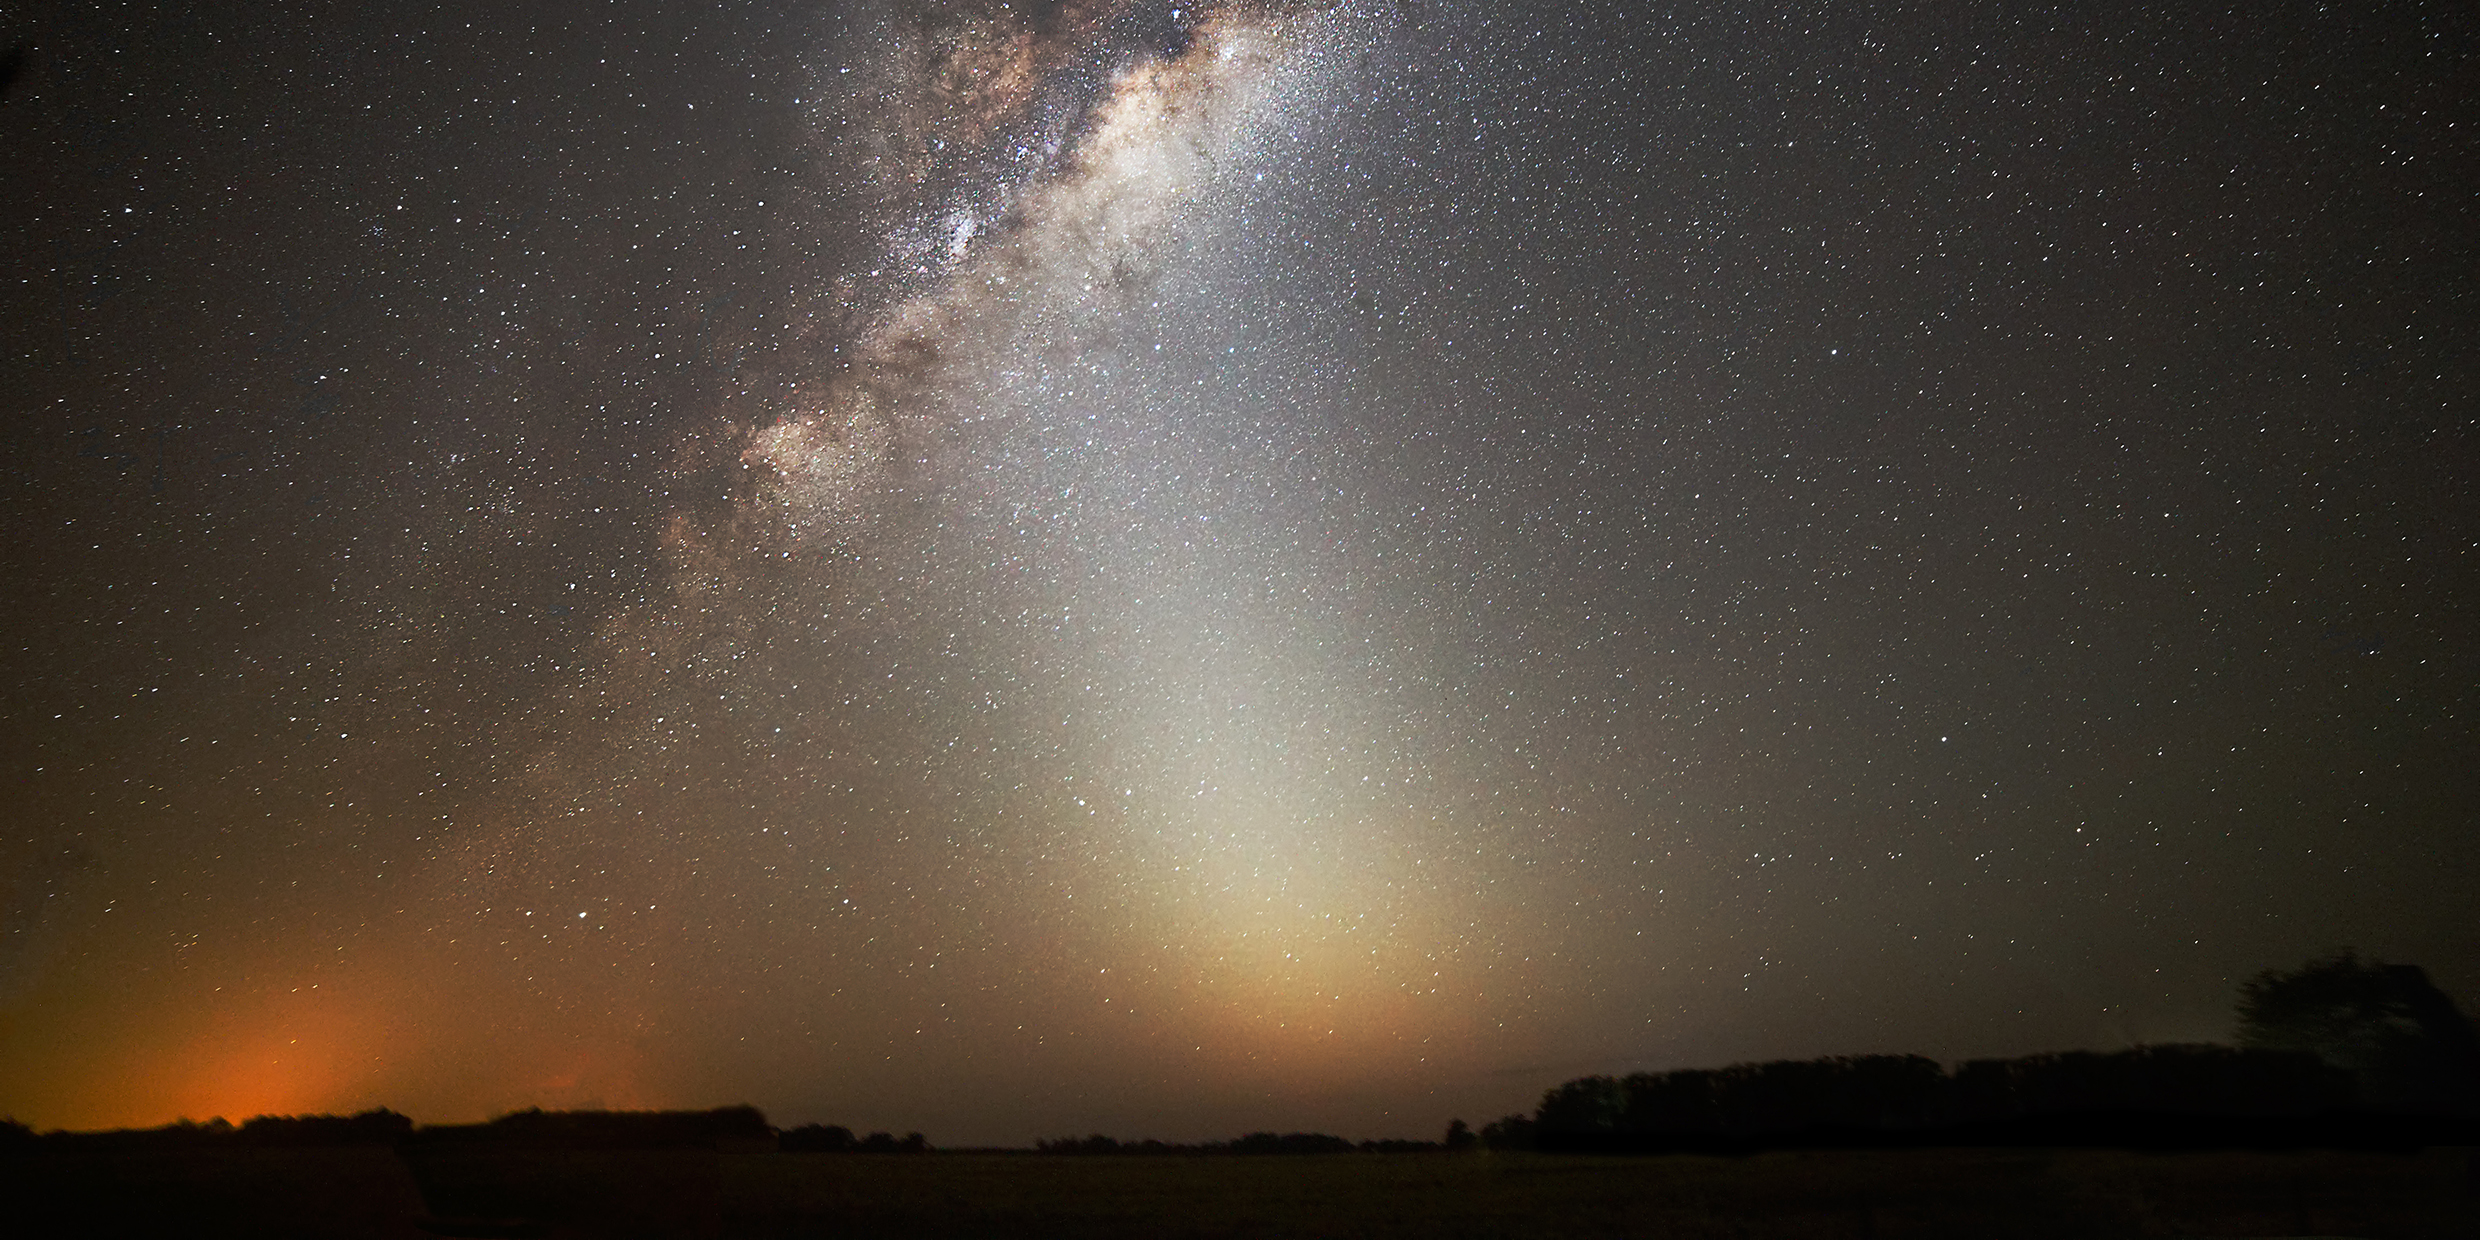 Image of the night sky illuminated by the Milky Way and the Zodiacal Light